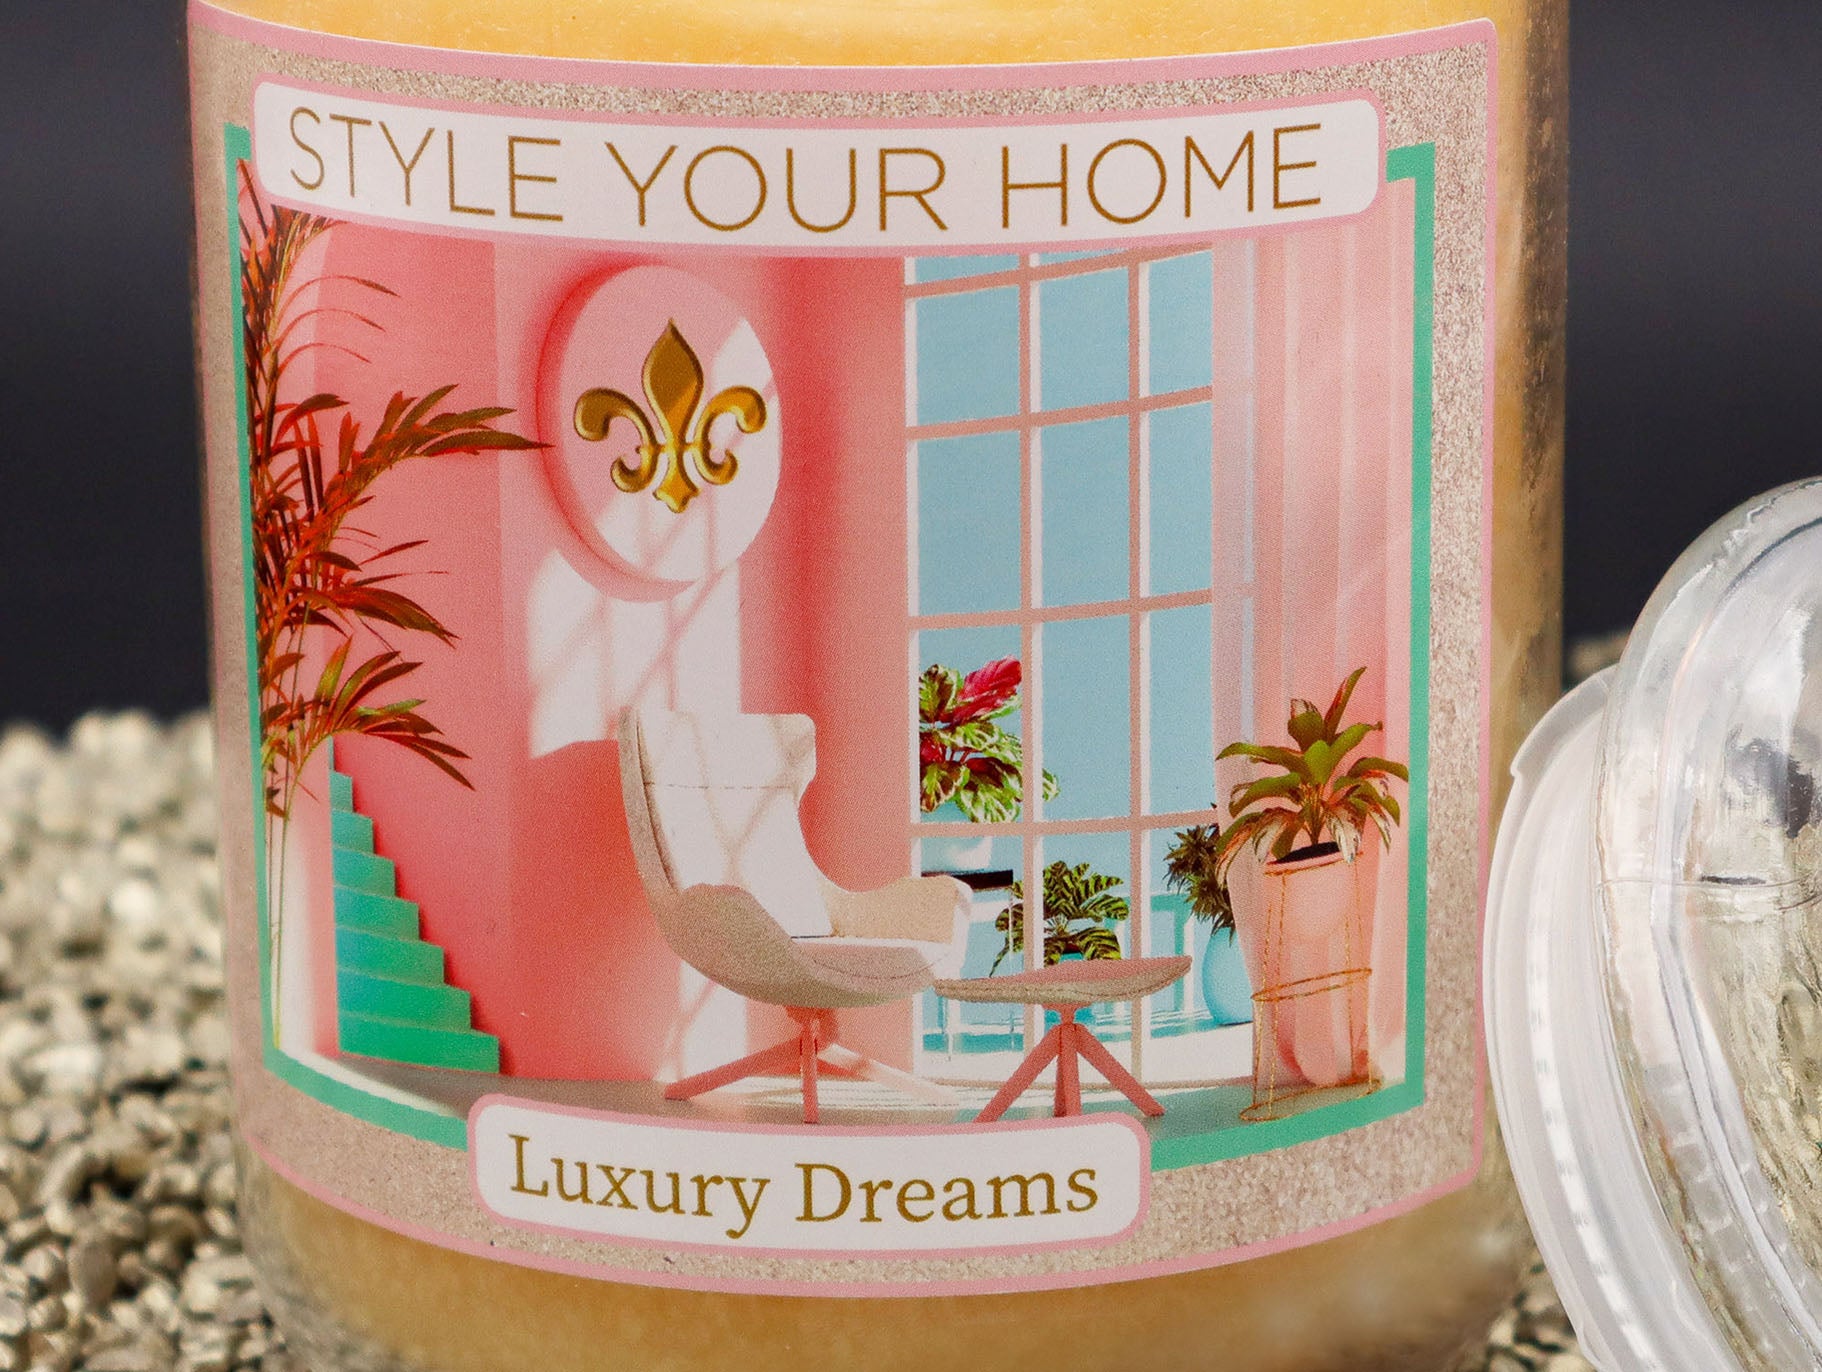 Duftkerze by Style Your Home "Luxury Dreams" 630g